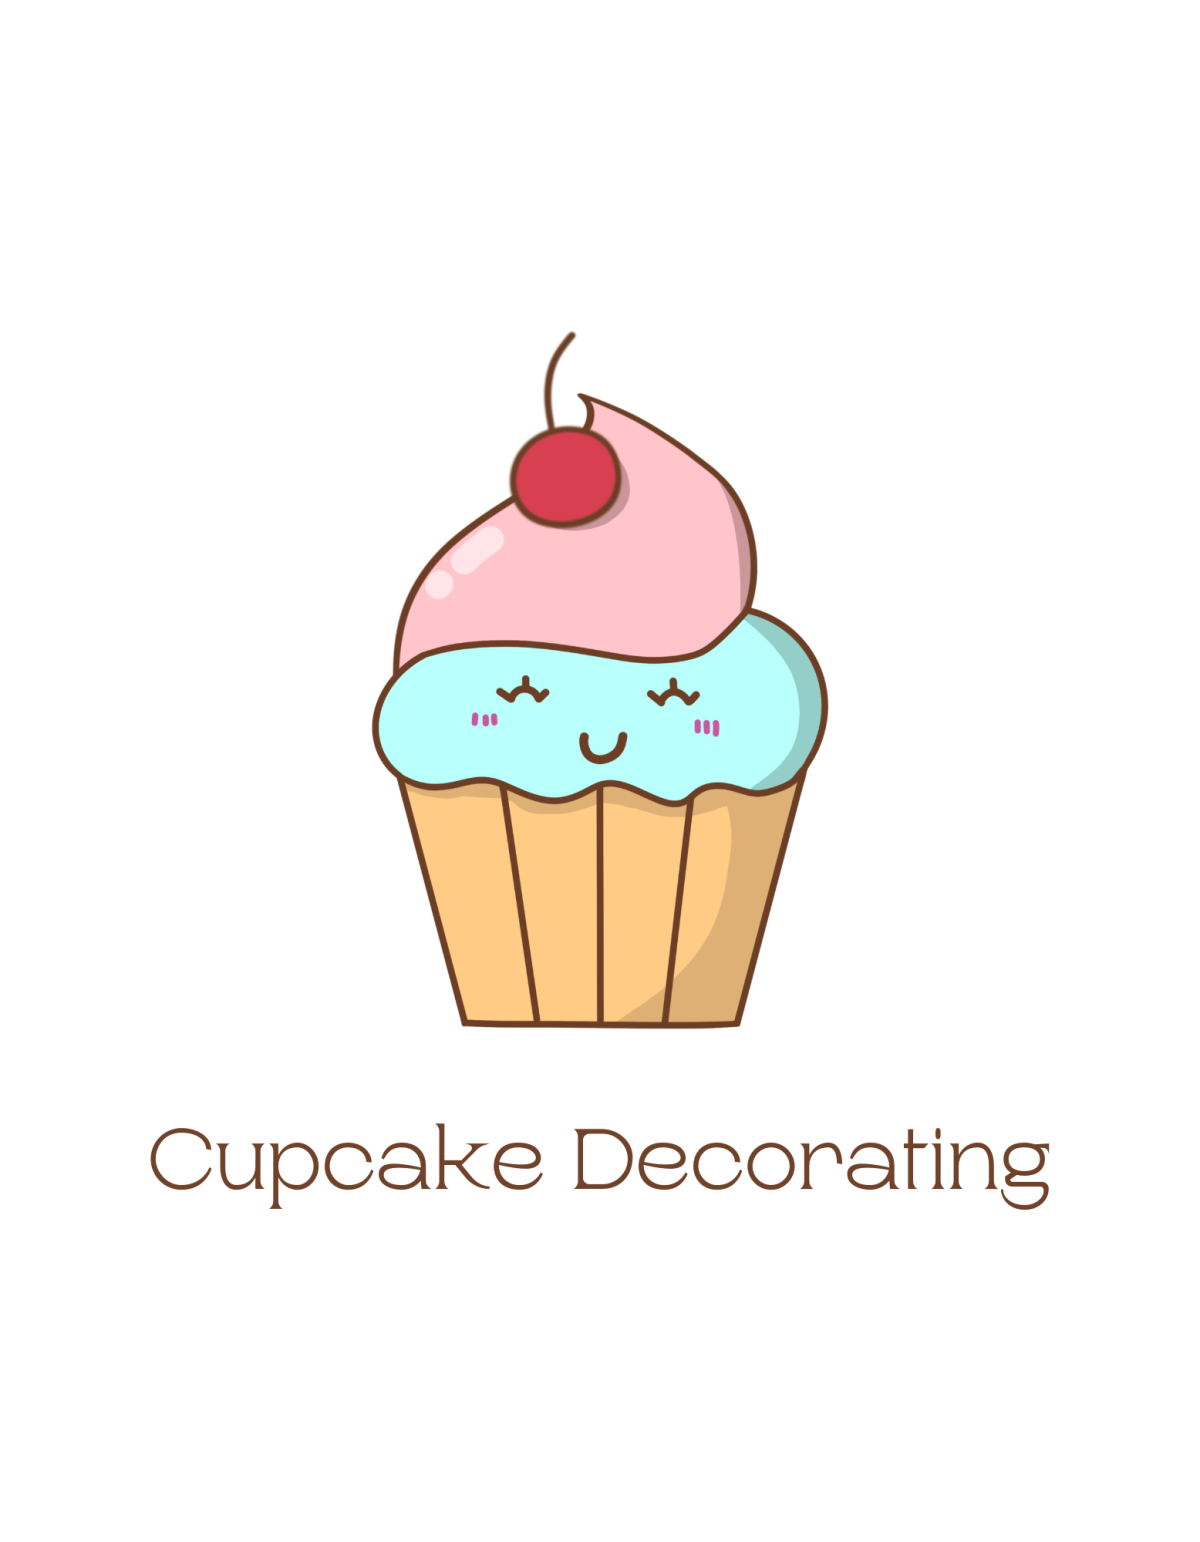 cupcake decorating, cupcakes, baking, prospect heights library, prospect heights